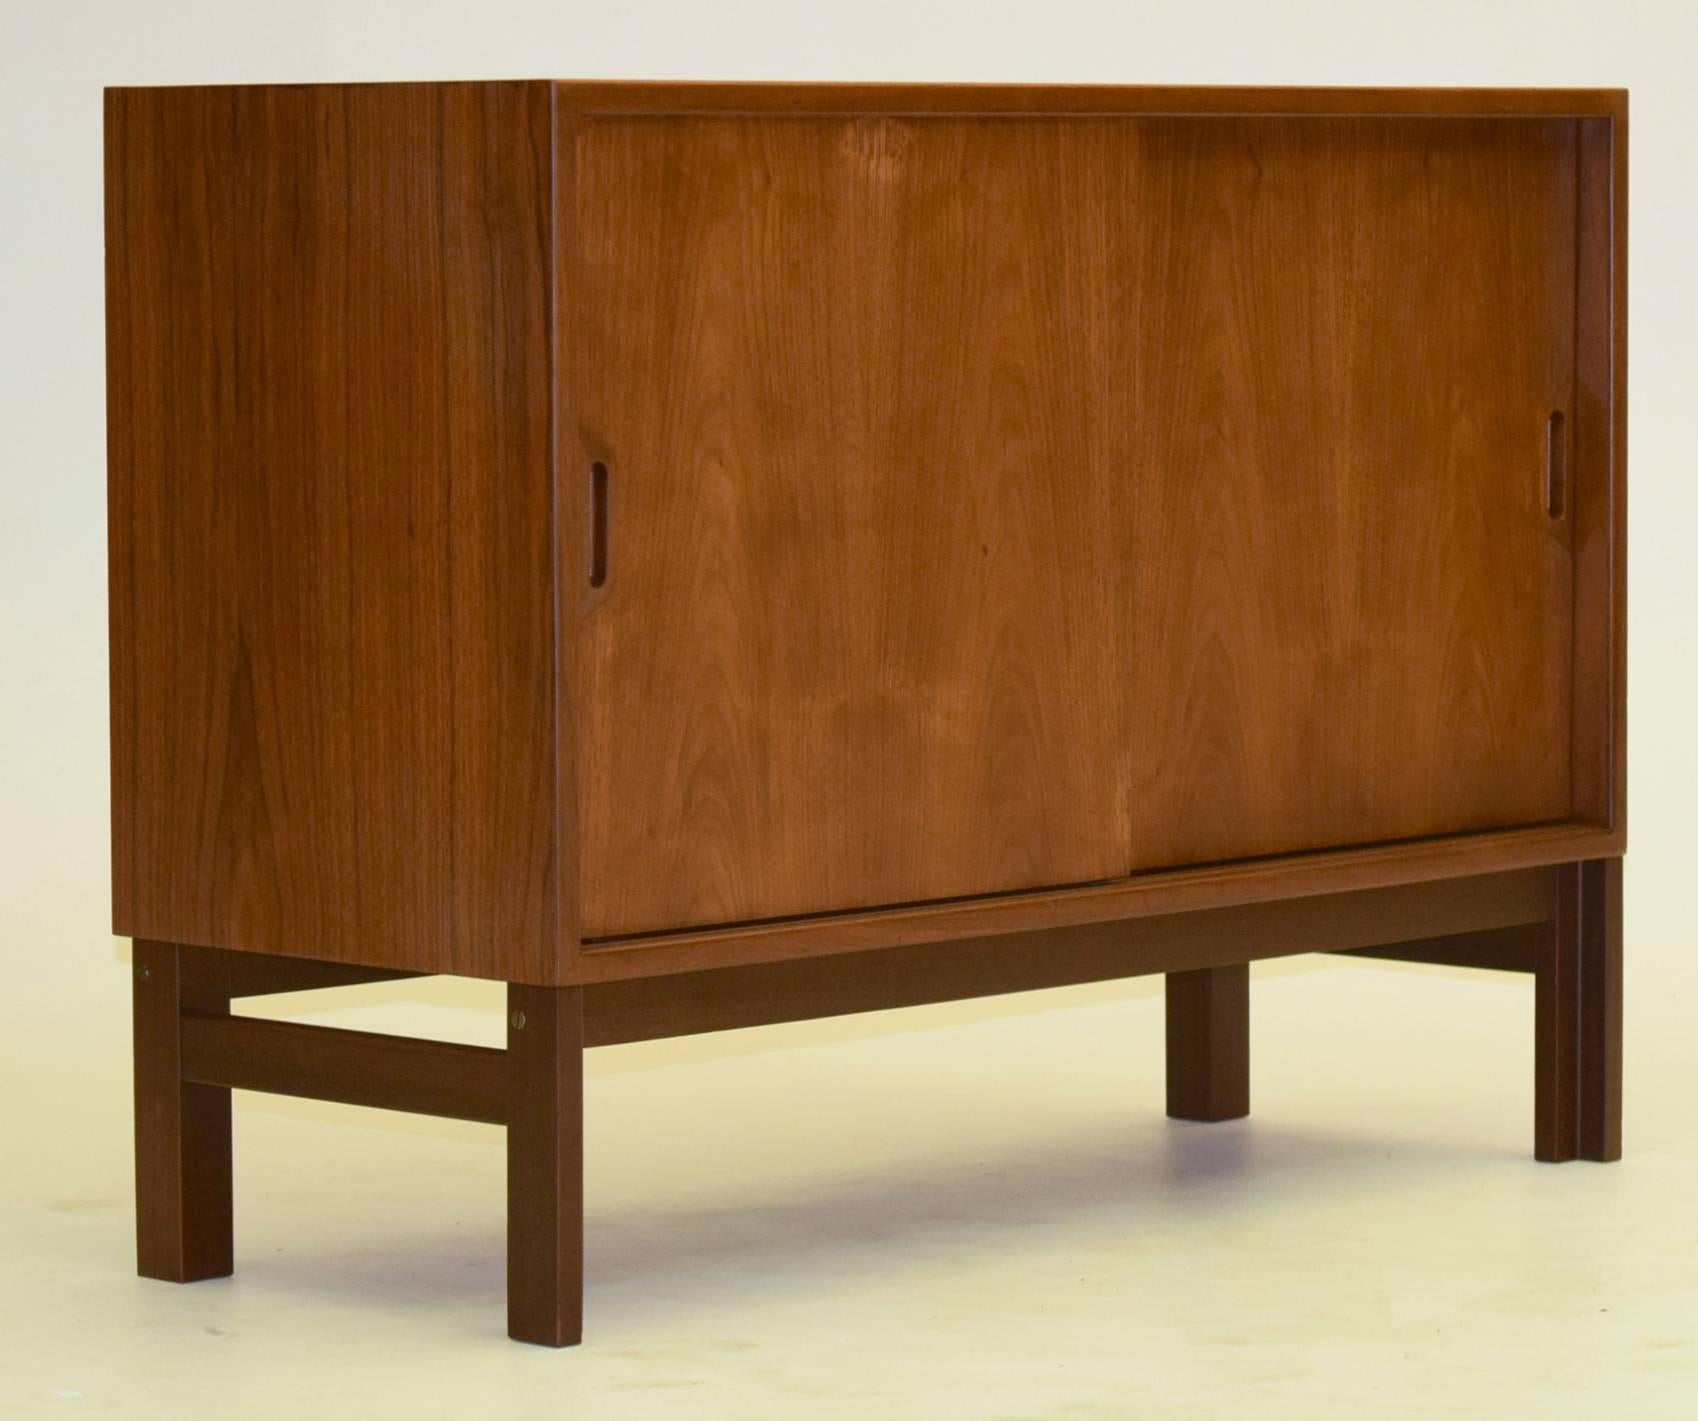 Elegant minimalism and produced from thick lumber and teak, this exquisite sideboard from Denmark (signed) is ideal for smaller spaces being petite but not too much so. Measures 39.25" wide, 15.25" deep and 28.75" tall.

The most